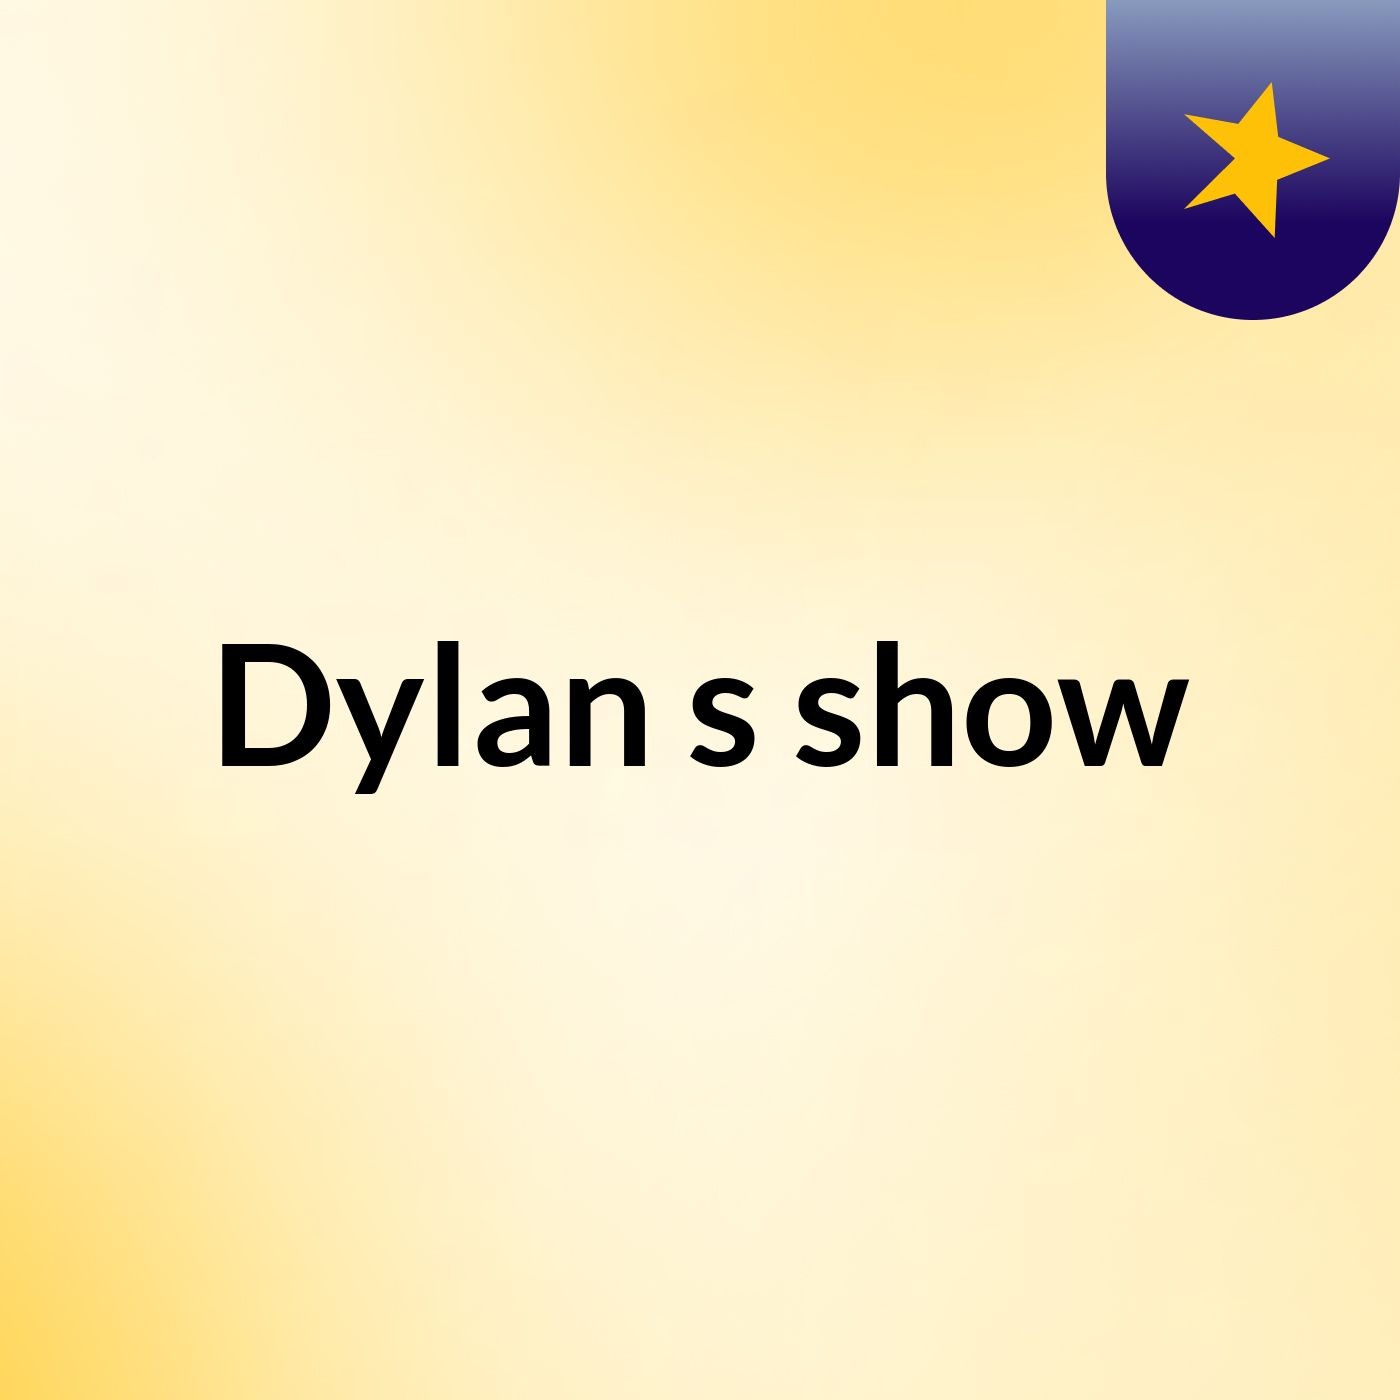 Dylan's show